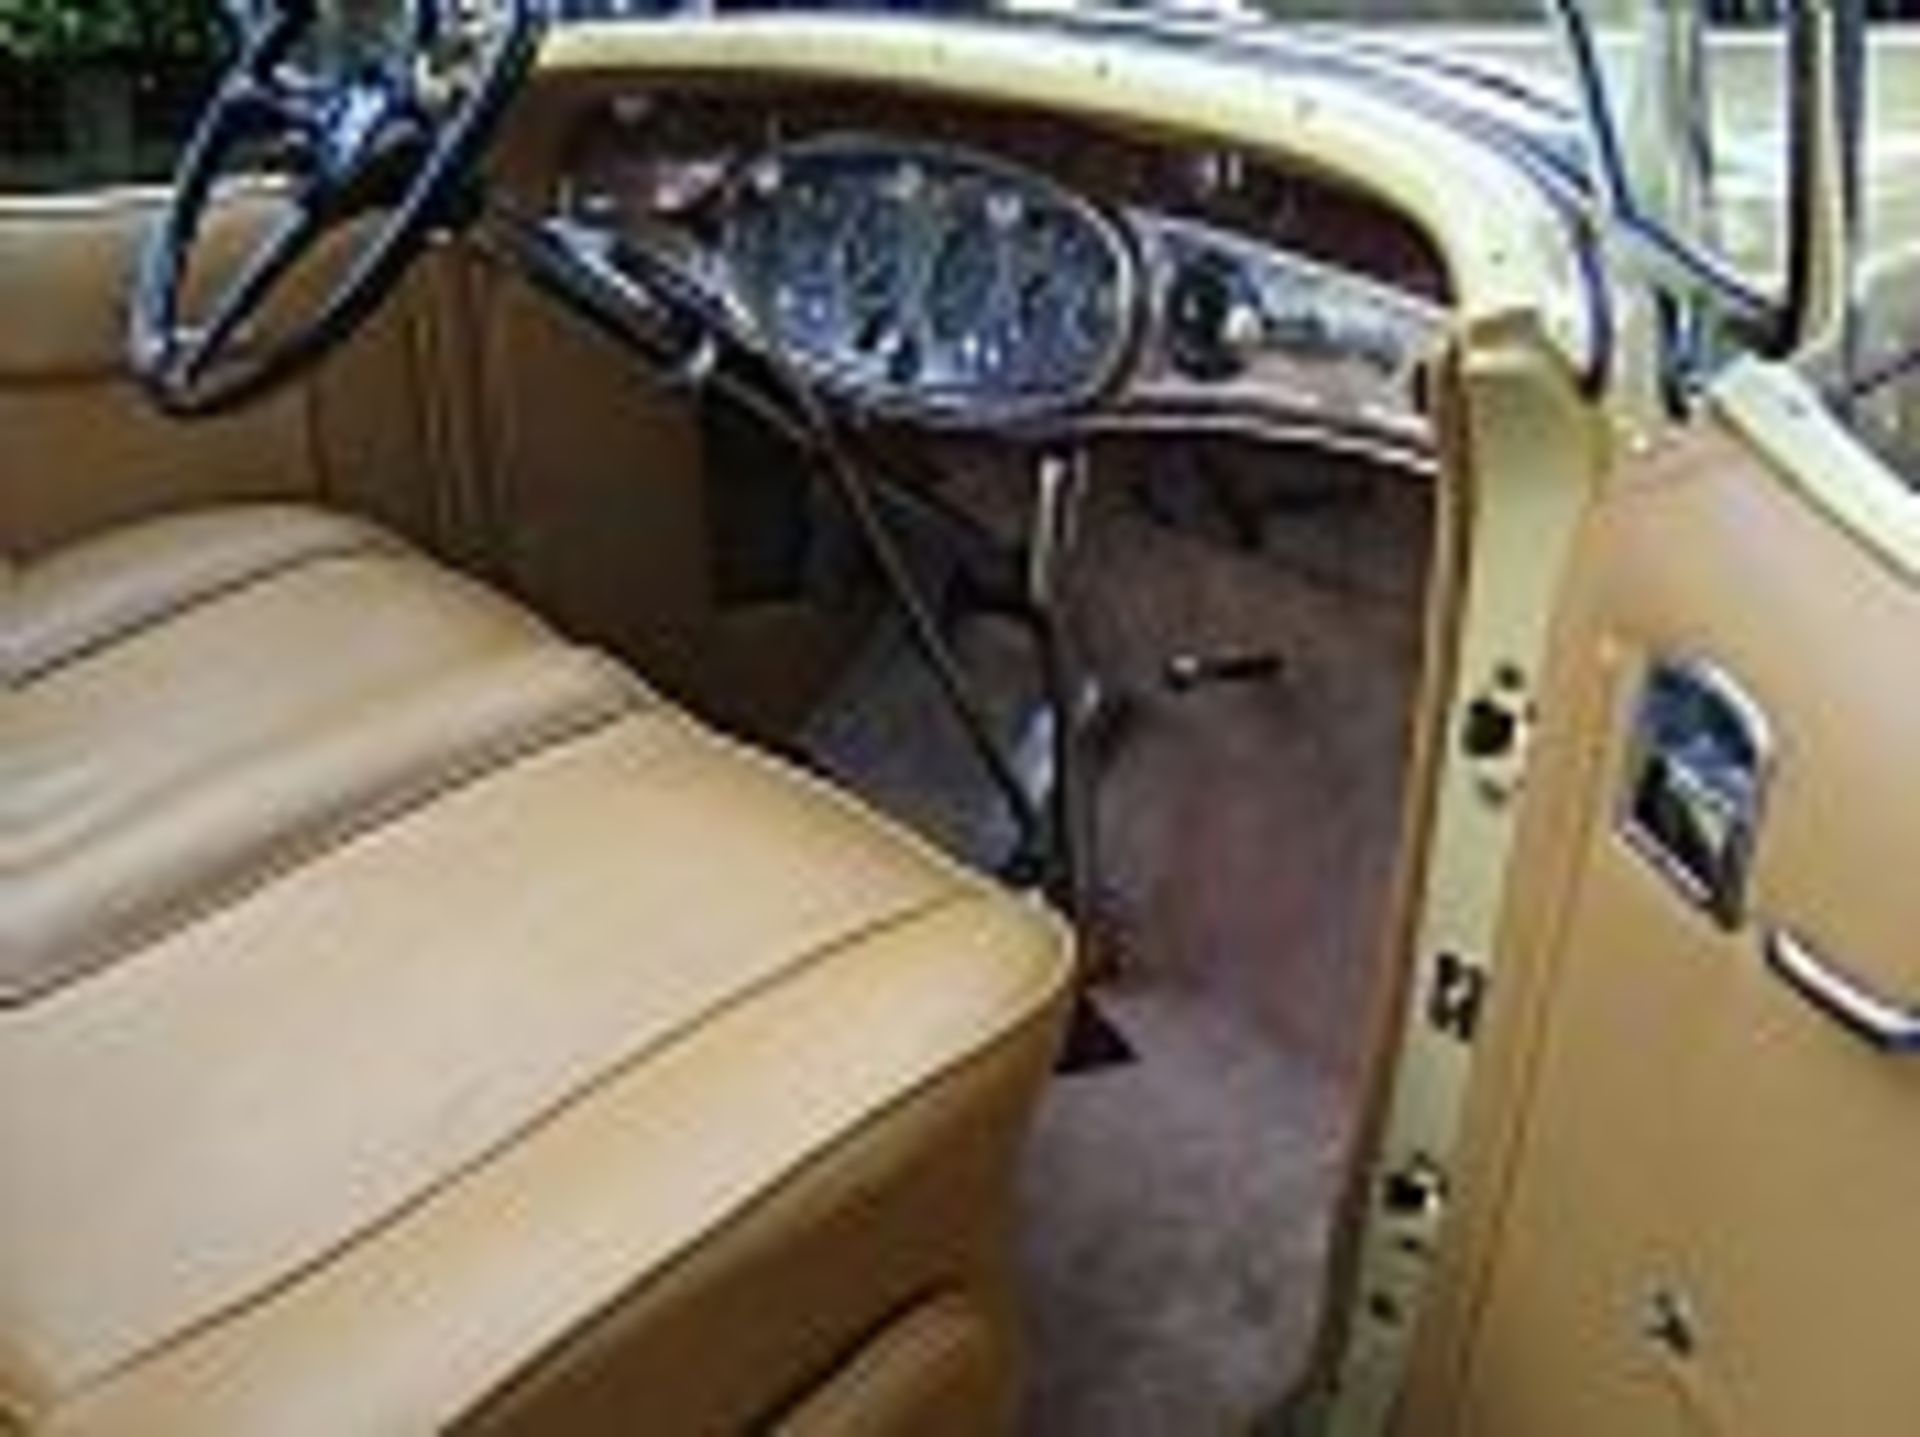 1931 Cadillac 370 A Roadster - Unbelievably Rare! - Image 3 of 4